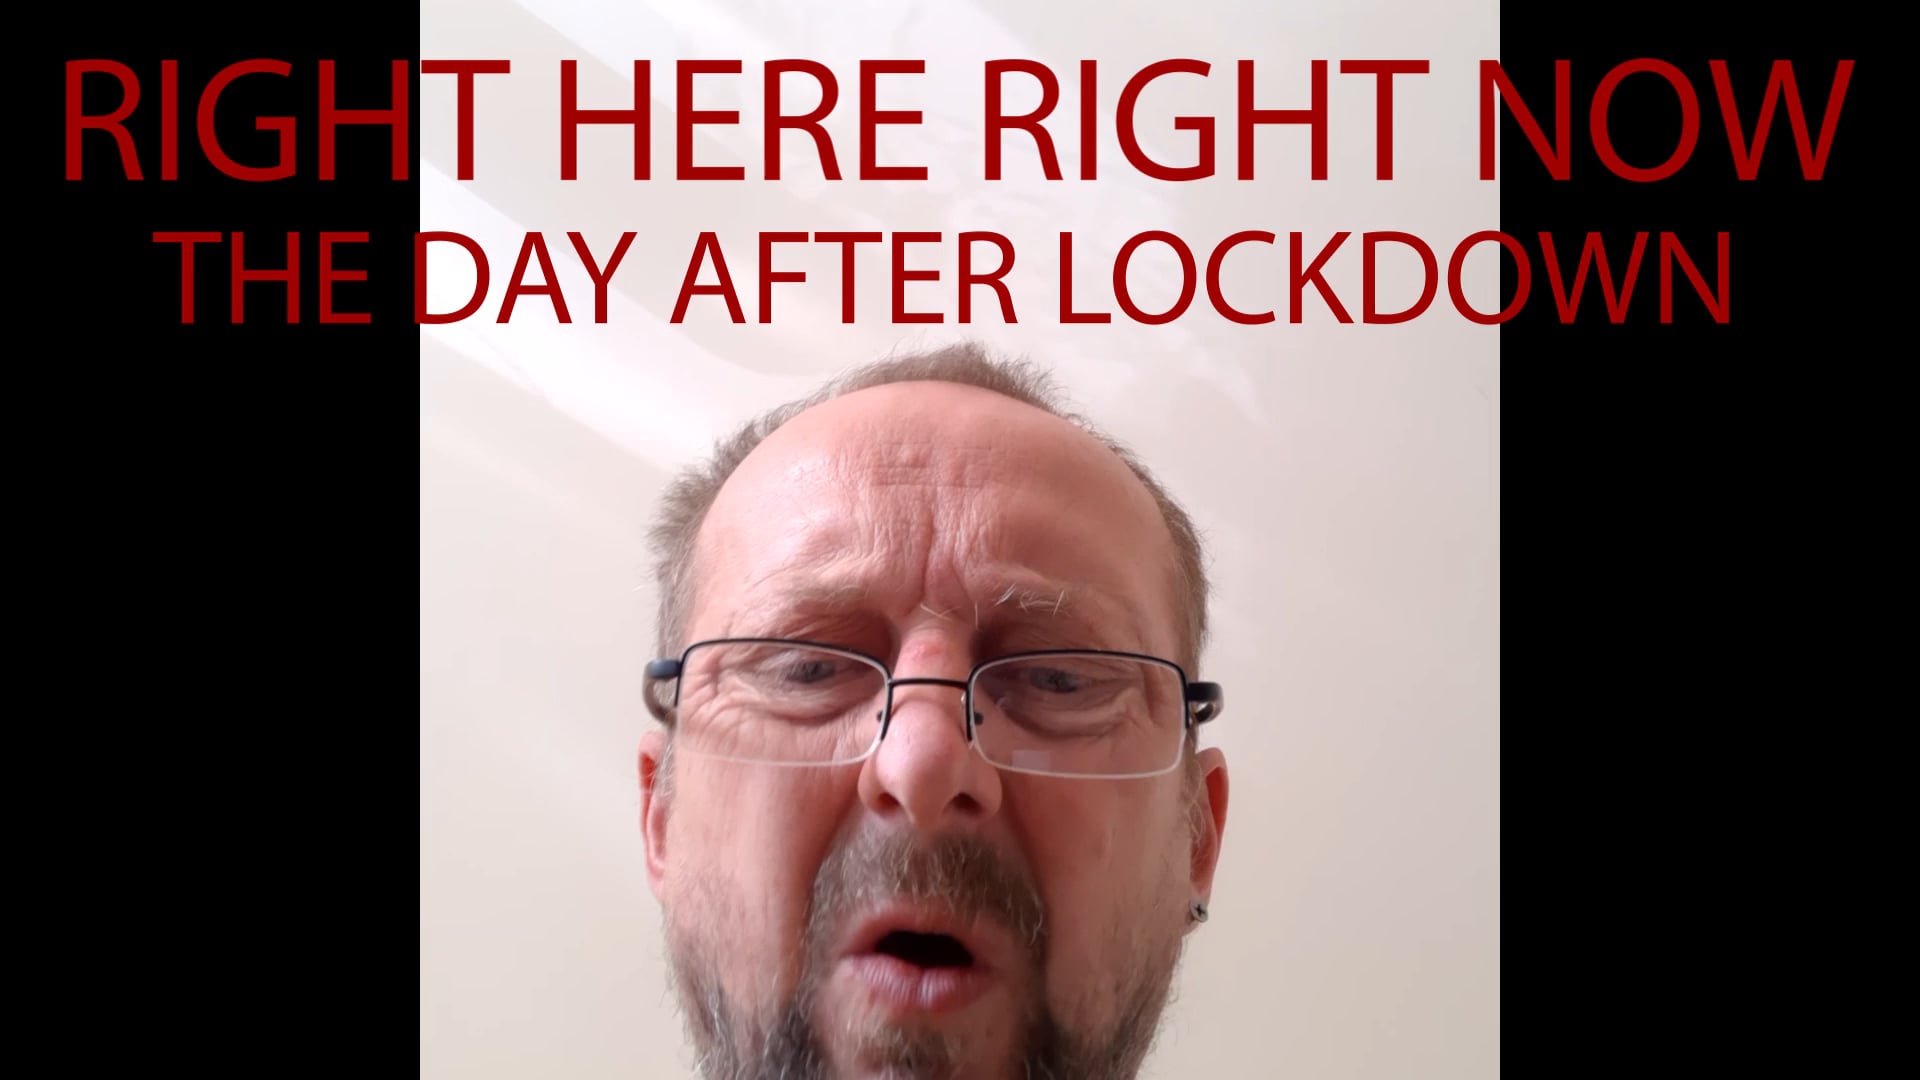 Watch Right Here Right Now: Lockdown Special on our Free Roku Channel